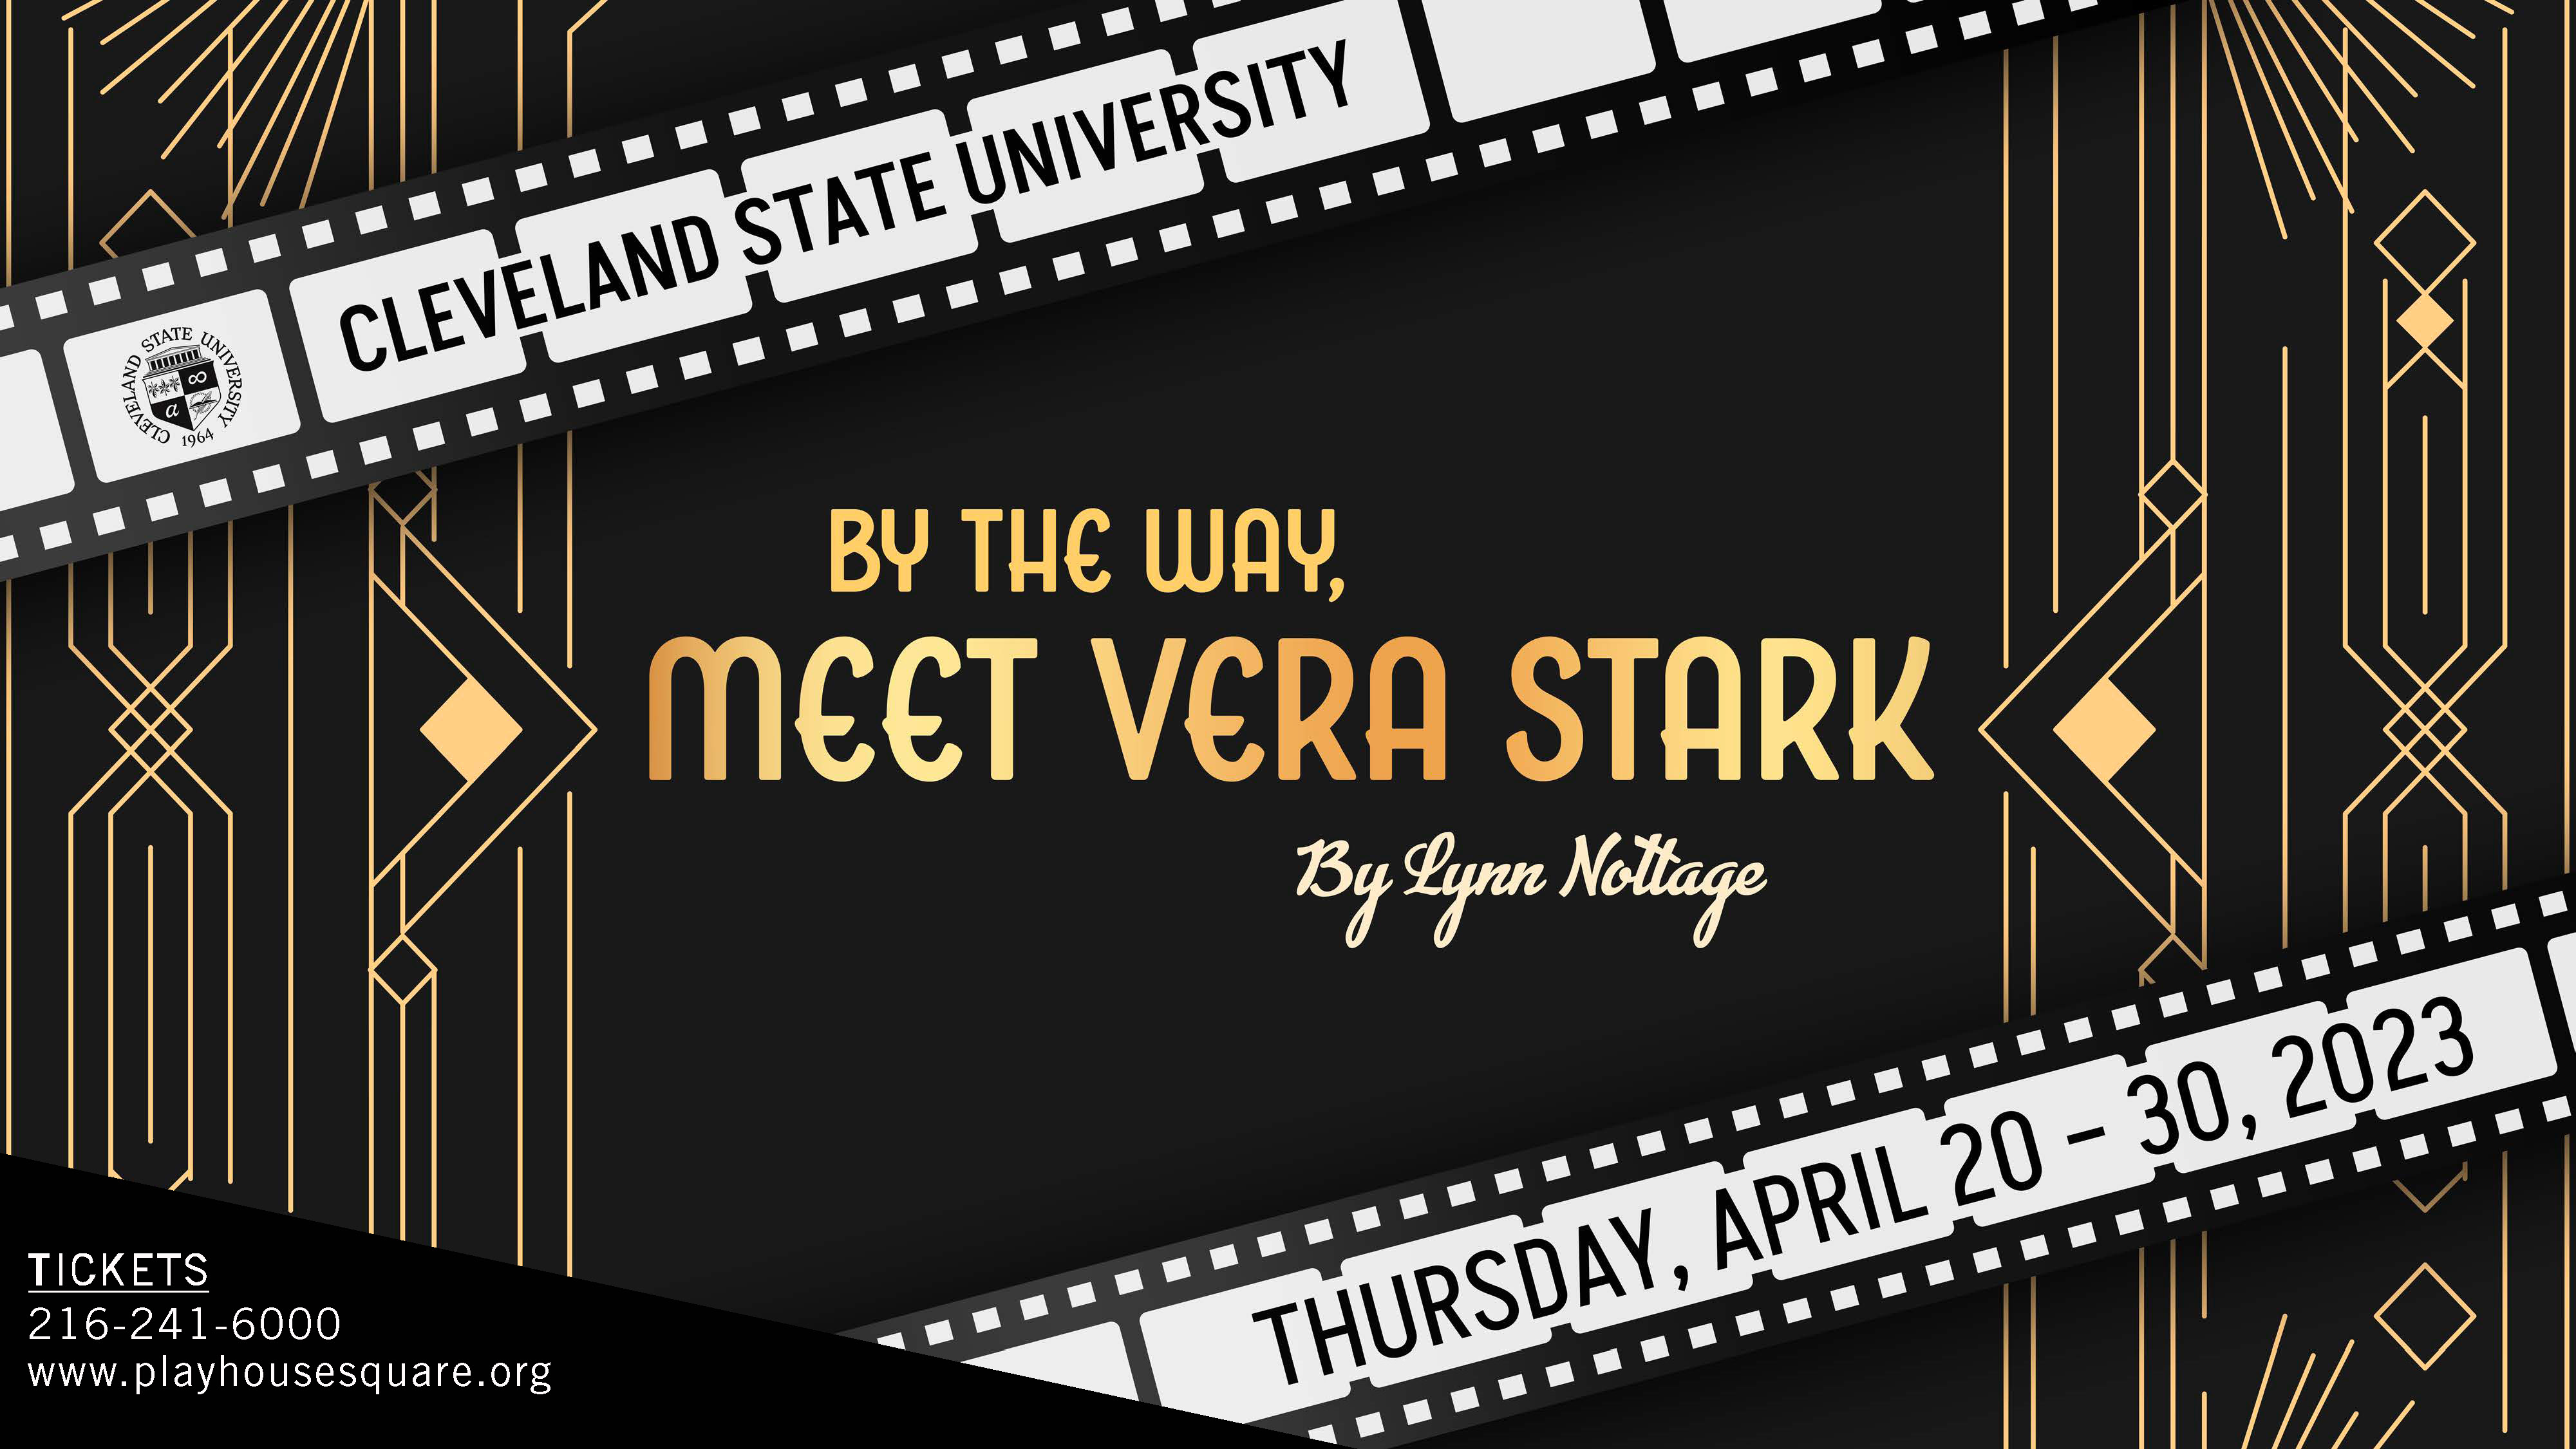 1930s movie glamour with Lynn Nottages comedy By the Way, Meet Vera Stark at Playhouse Square